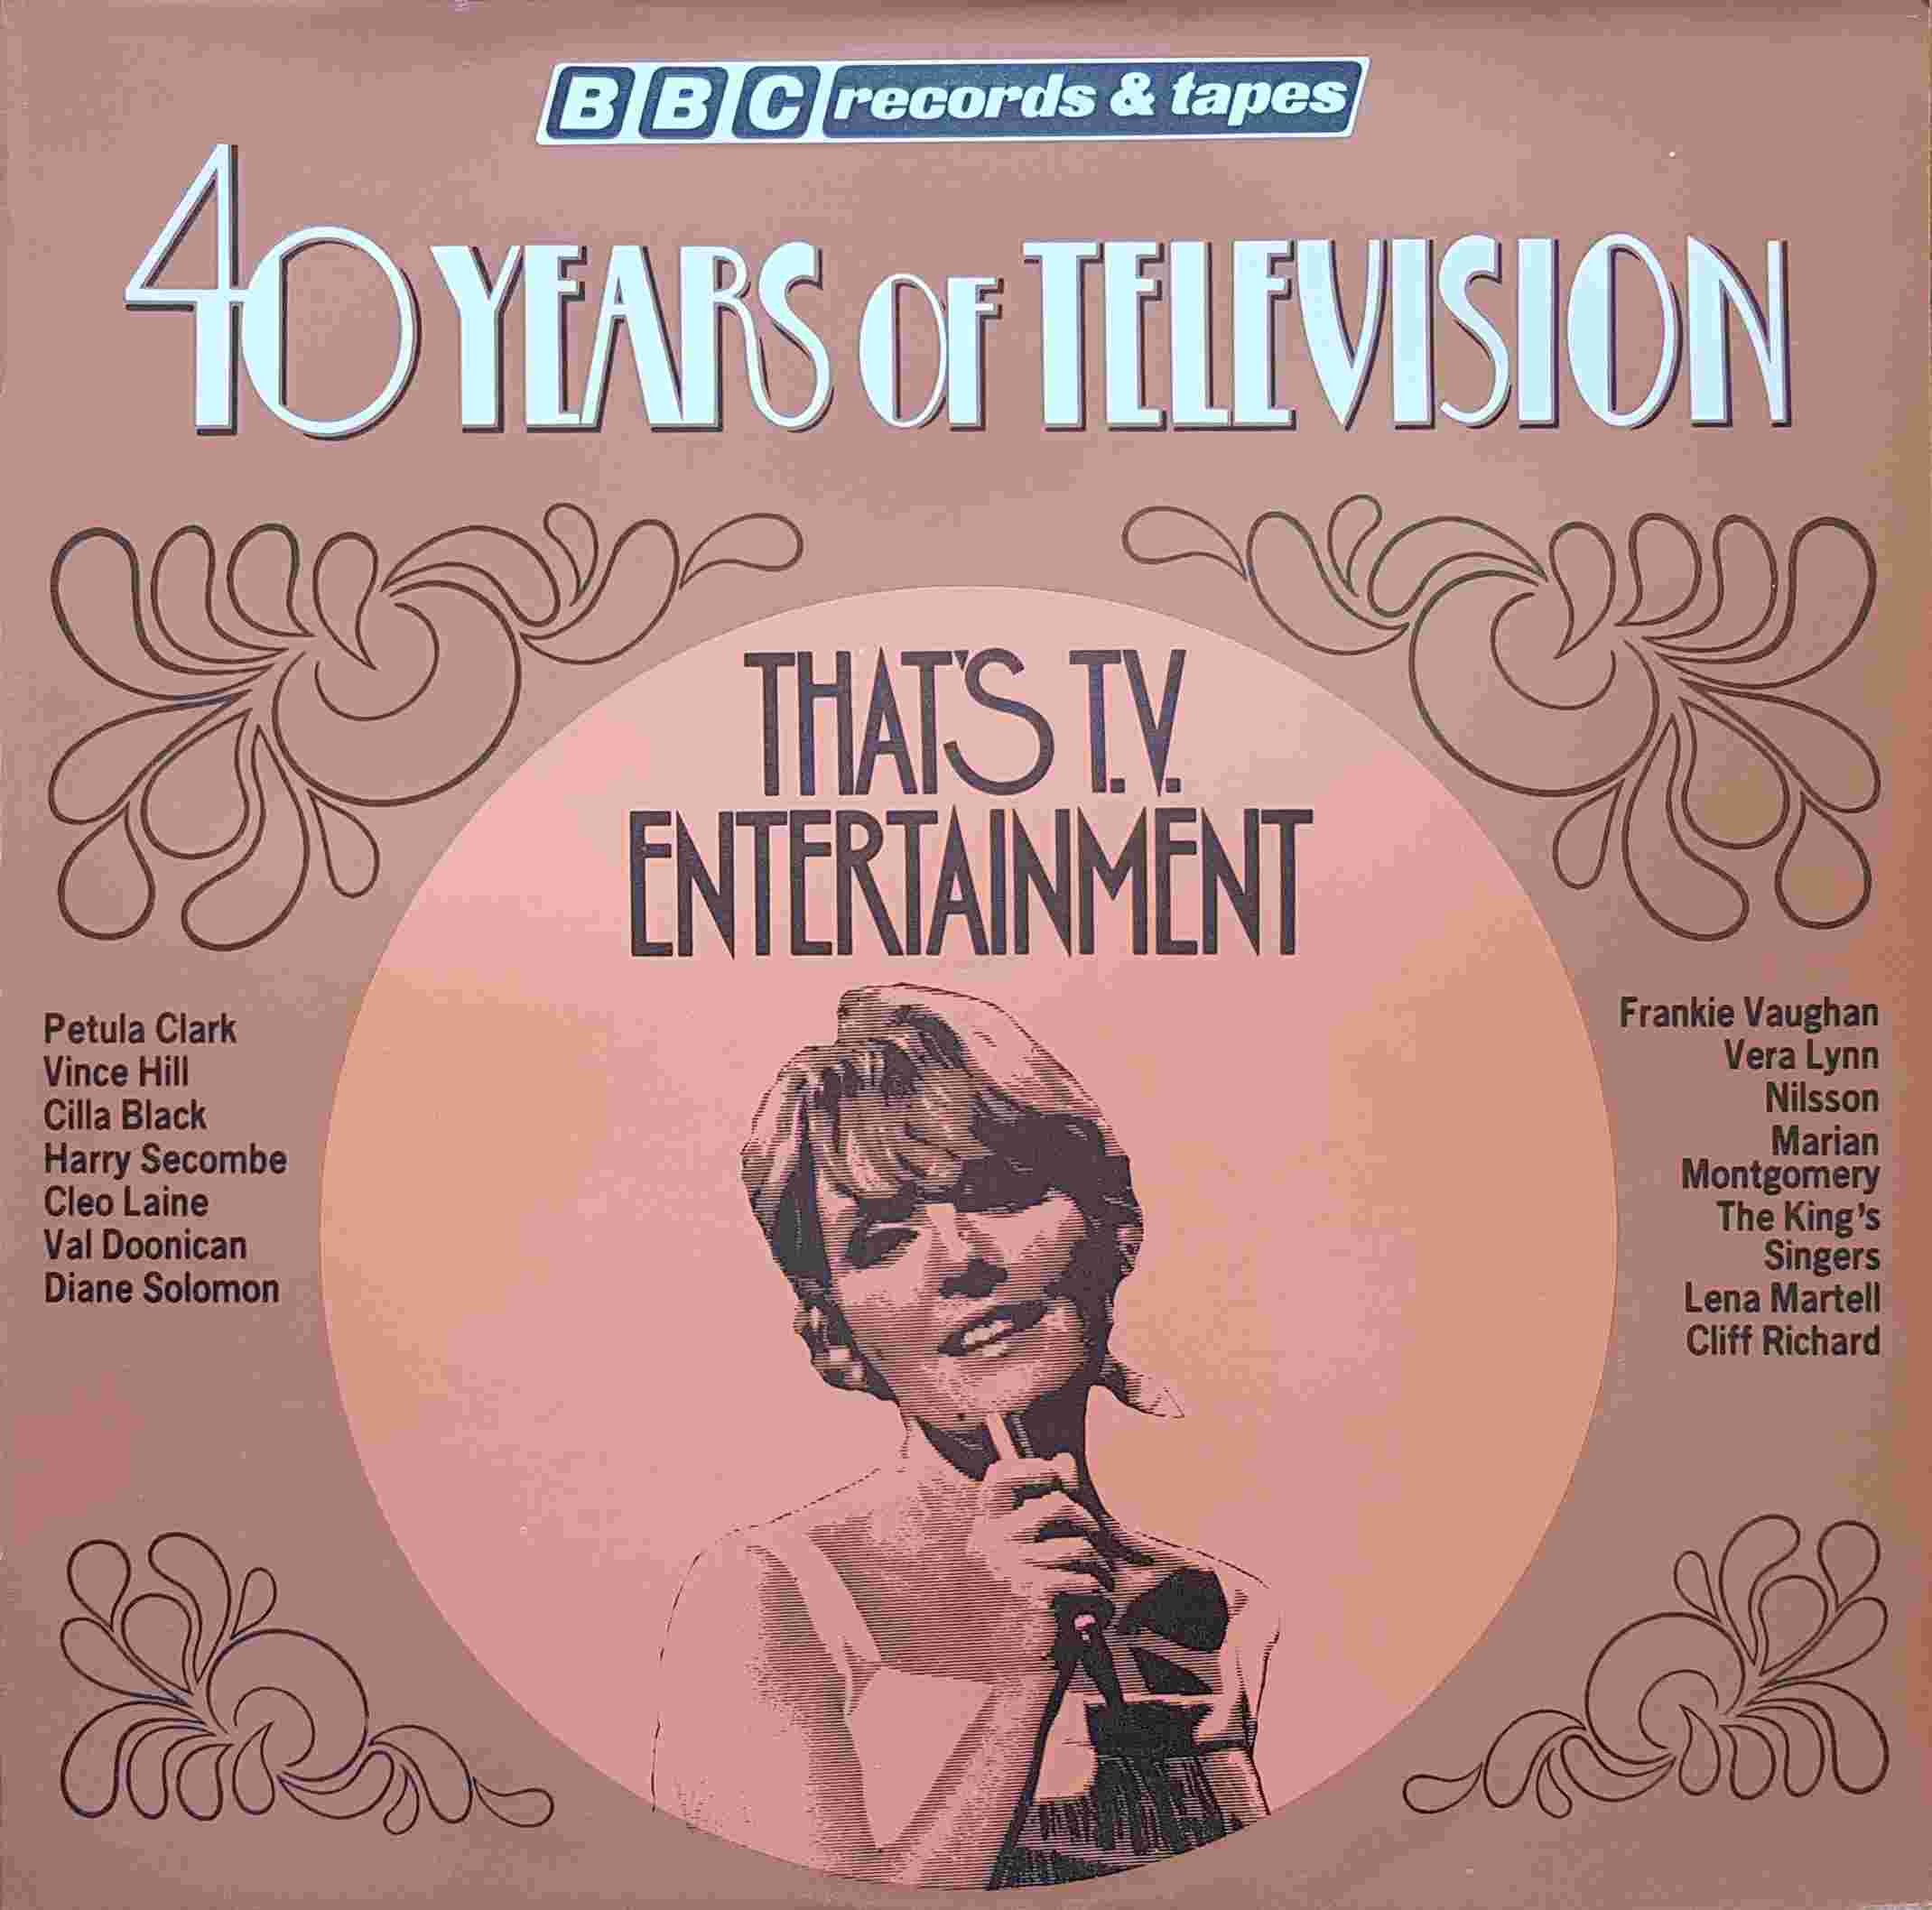 Picture of REB 250 That's TV entertainment by artist Various from the BBC albums - Records and Tapes library